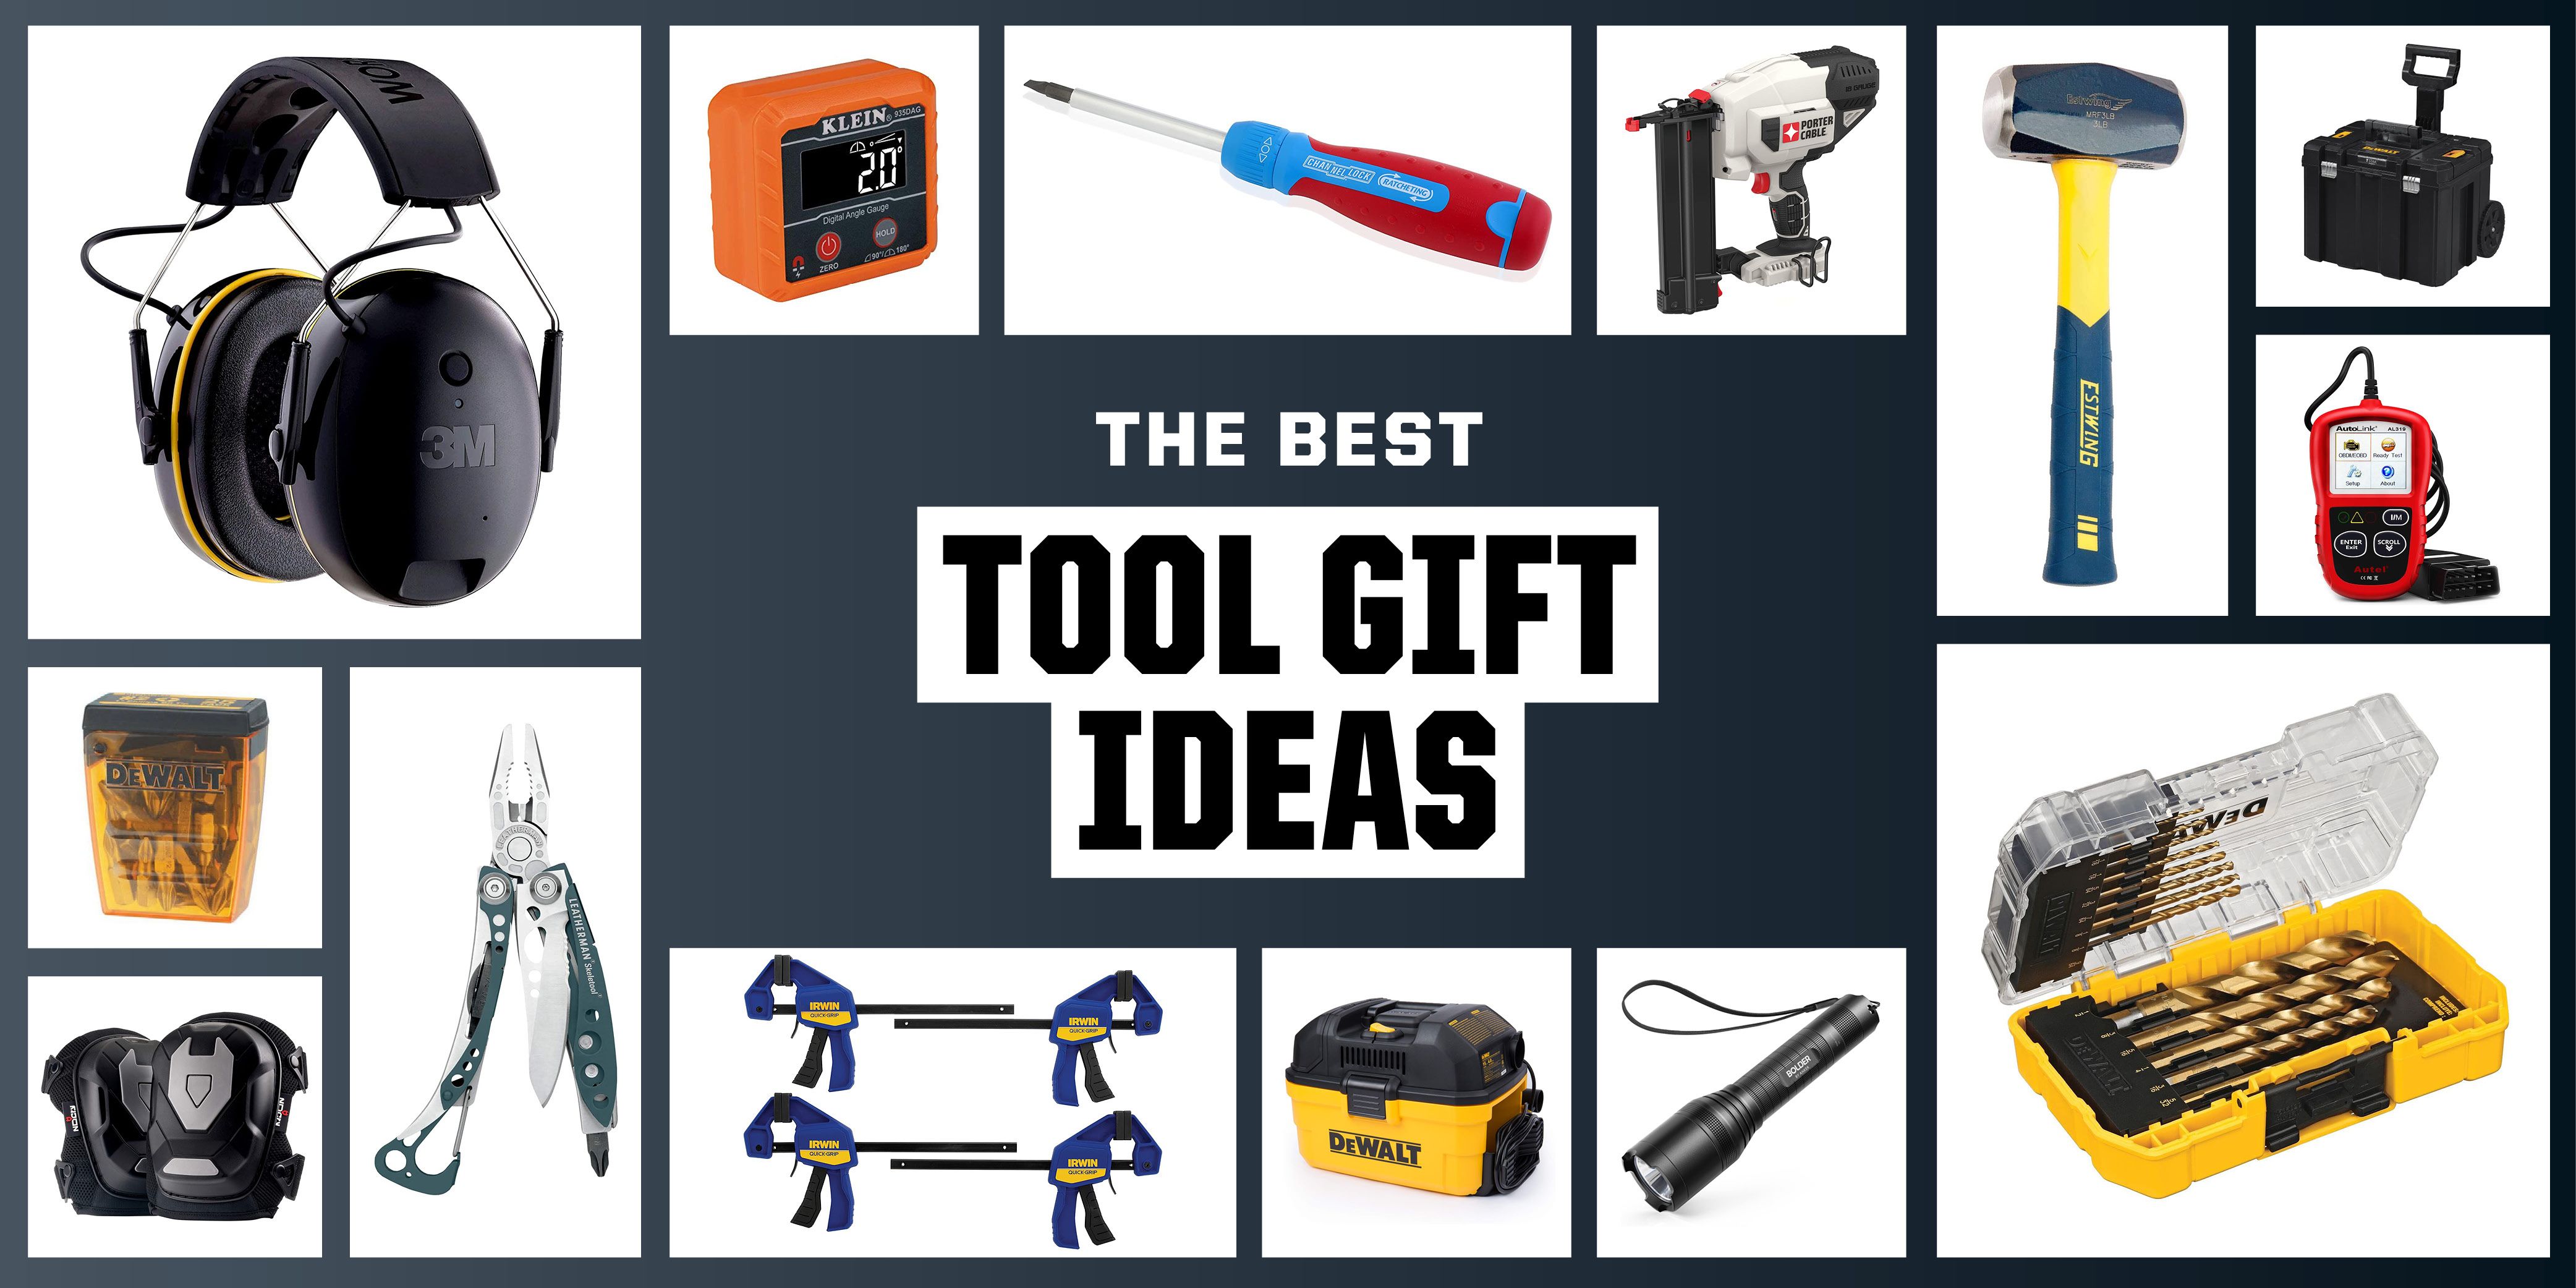 Tools & Gadgets Gifts